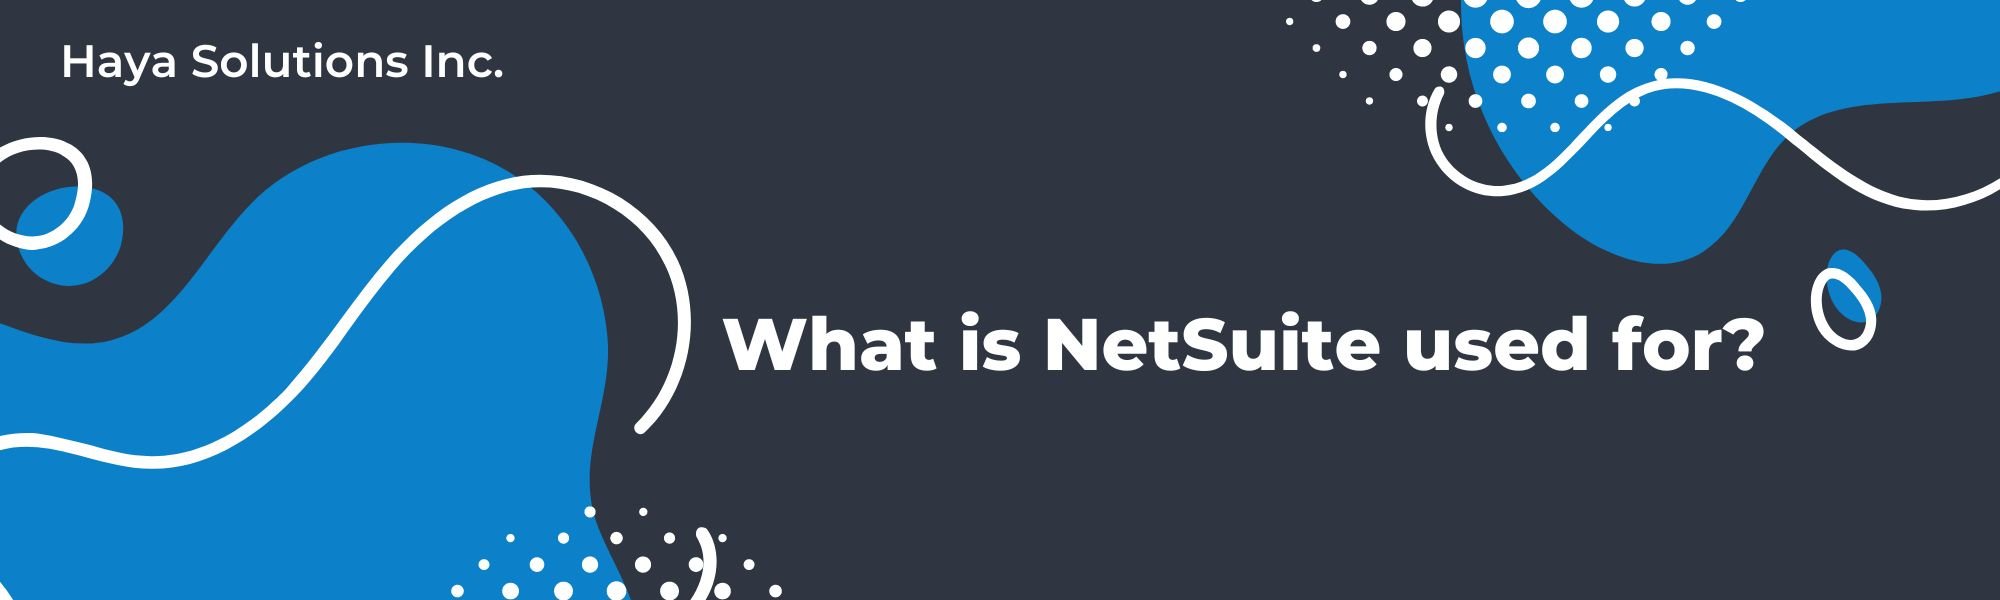 What is NetSuite used for?